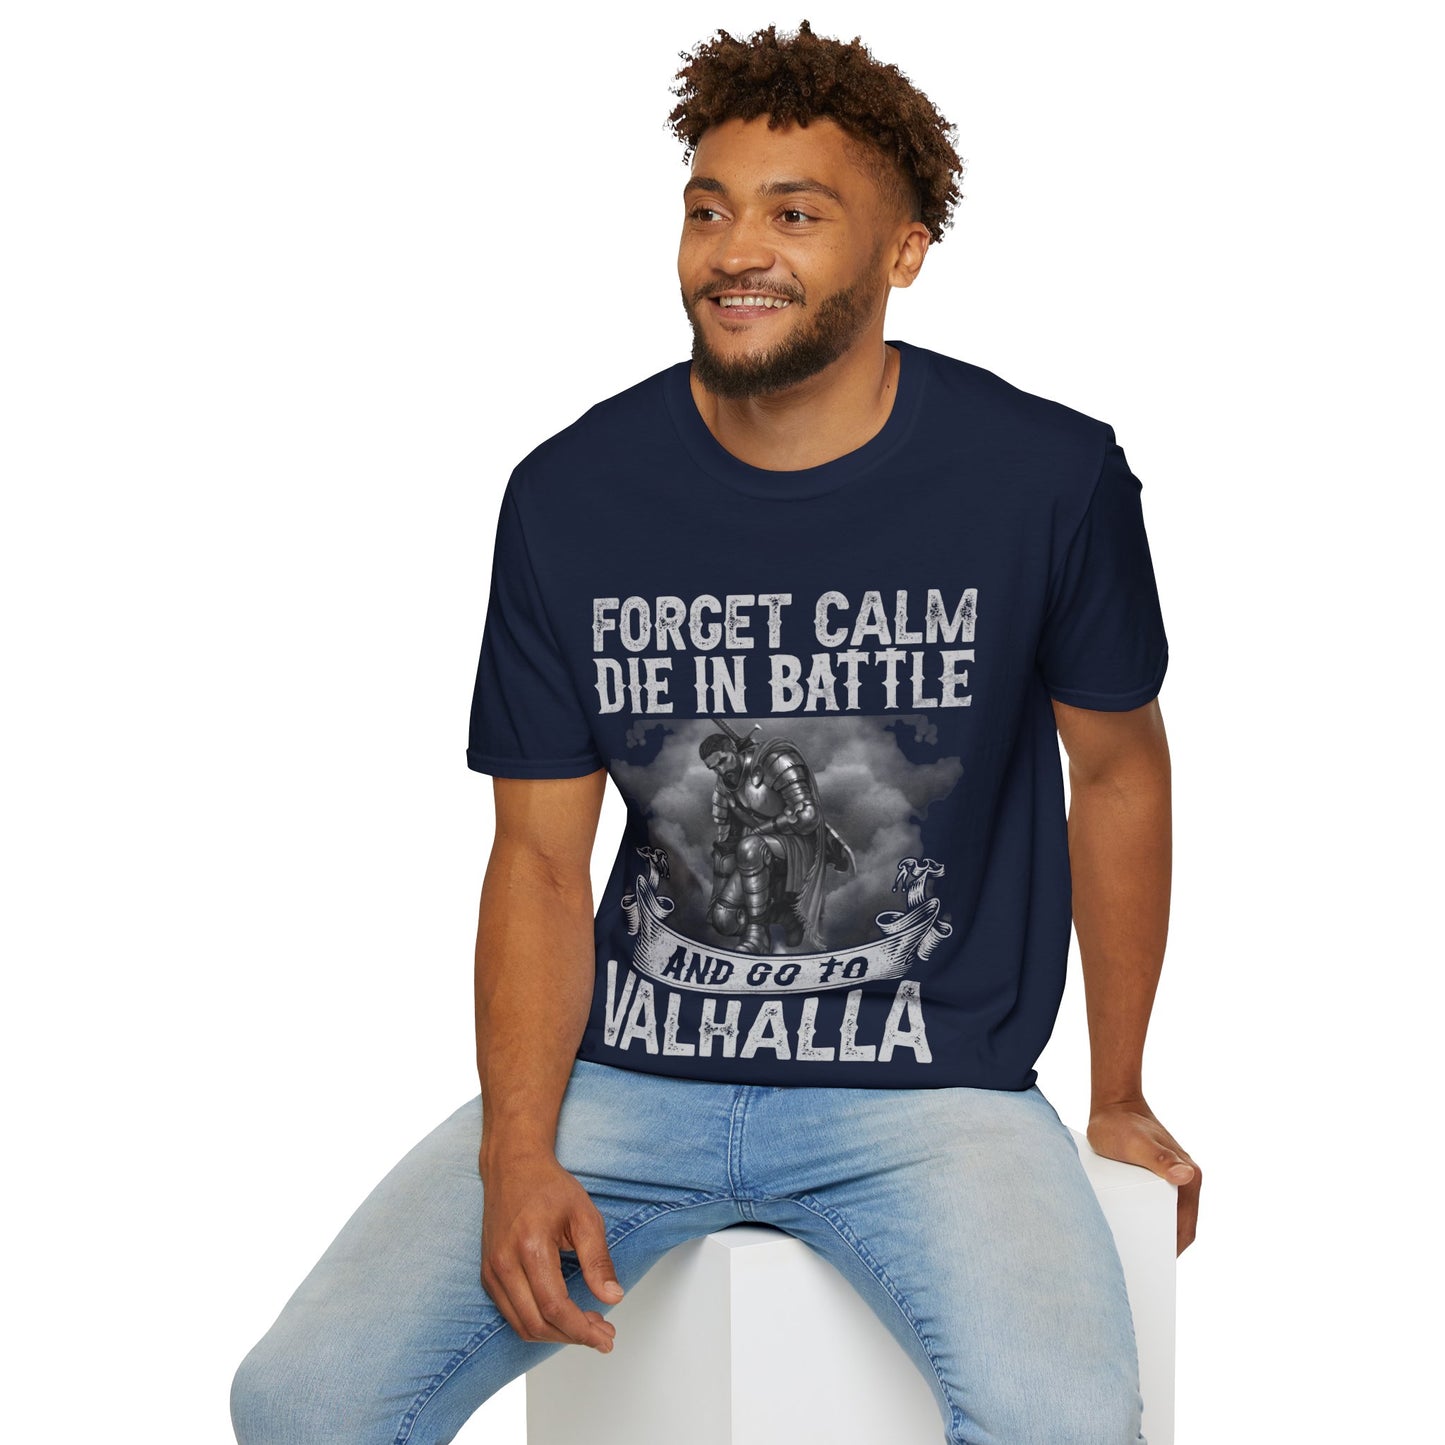 Forget Calm Die In Battle And Go To Valhalla T-Shirt